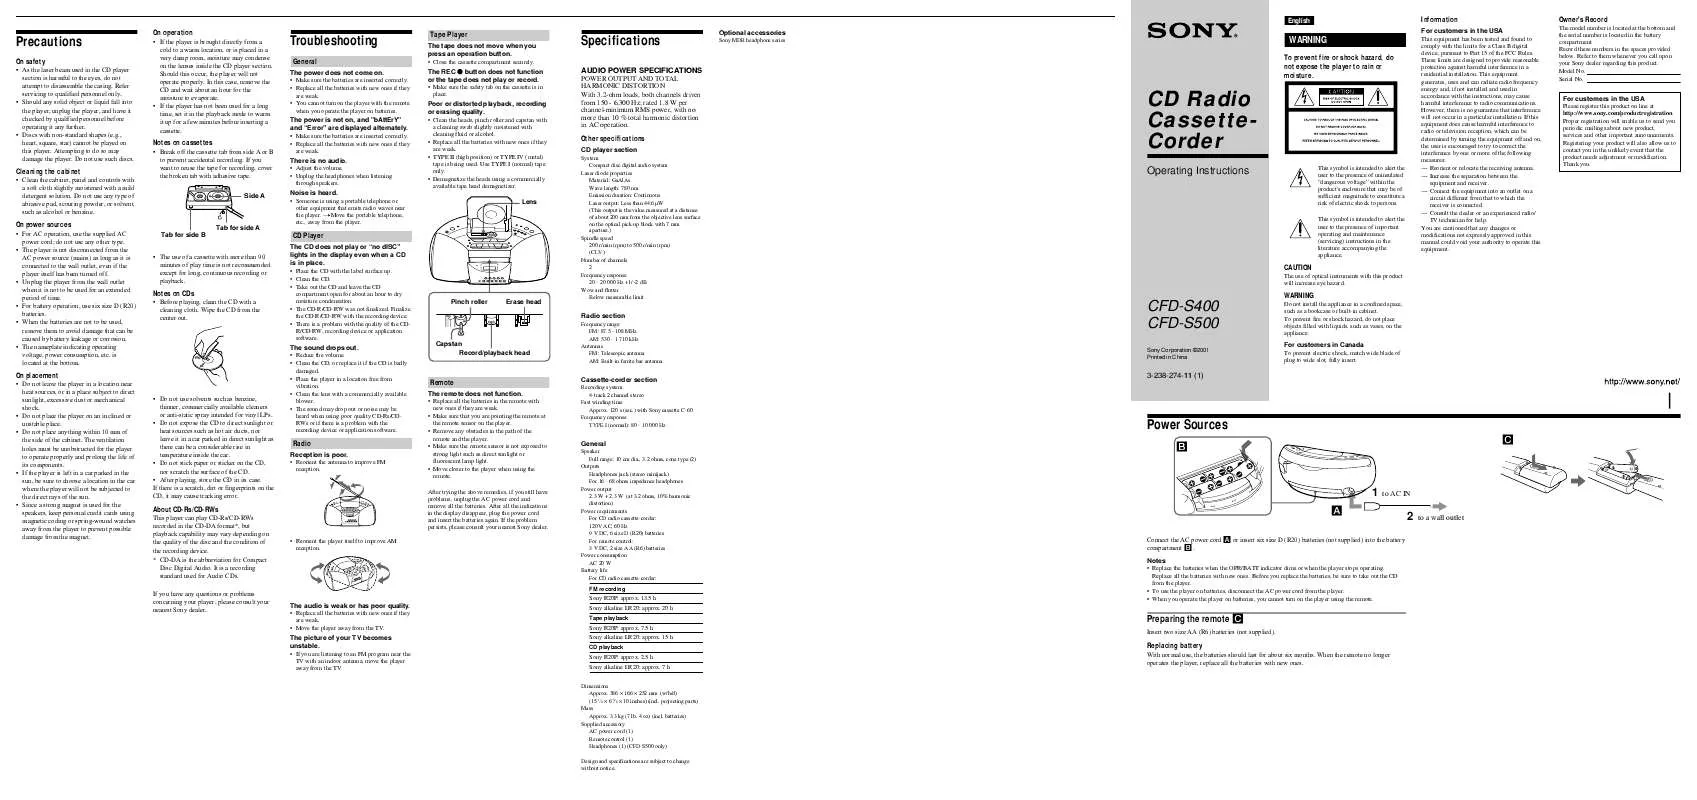 Mode d'emploi SONY CFD-S500